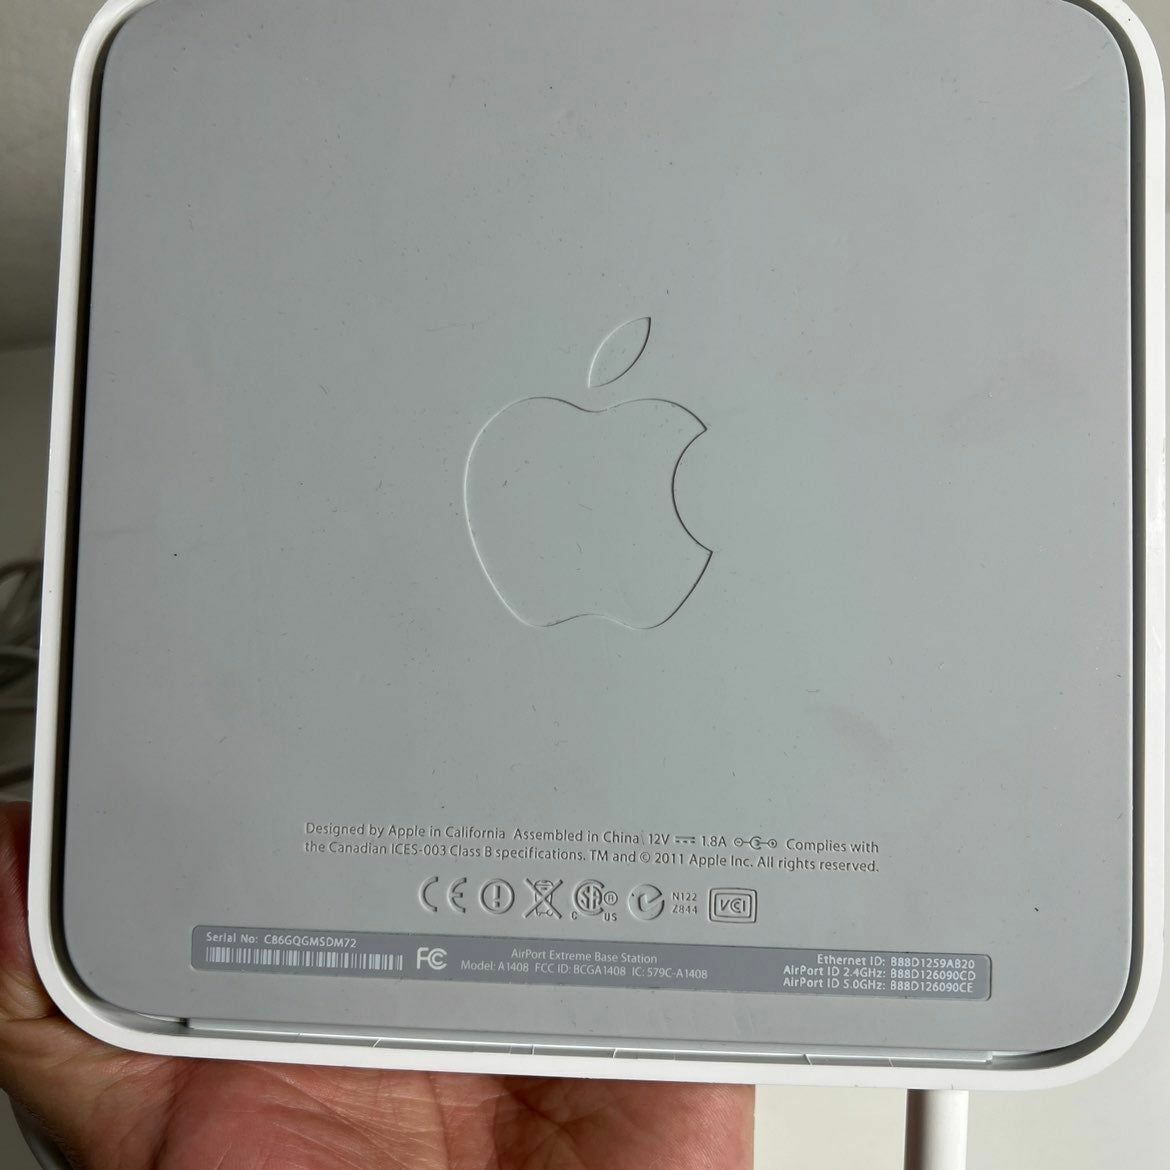 a hand is holding a white apple computer